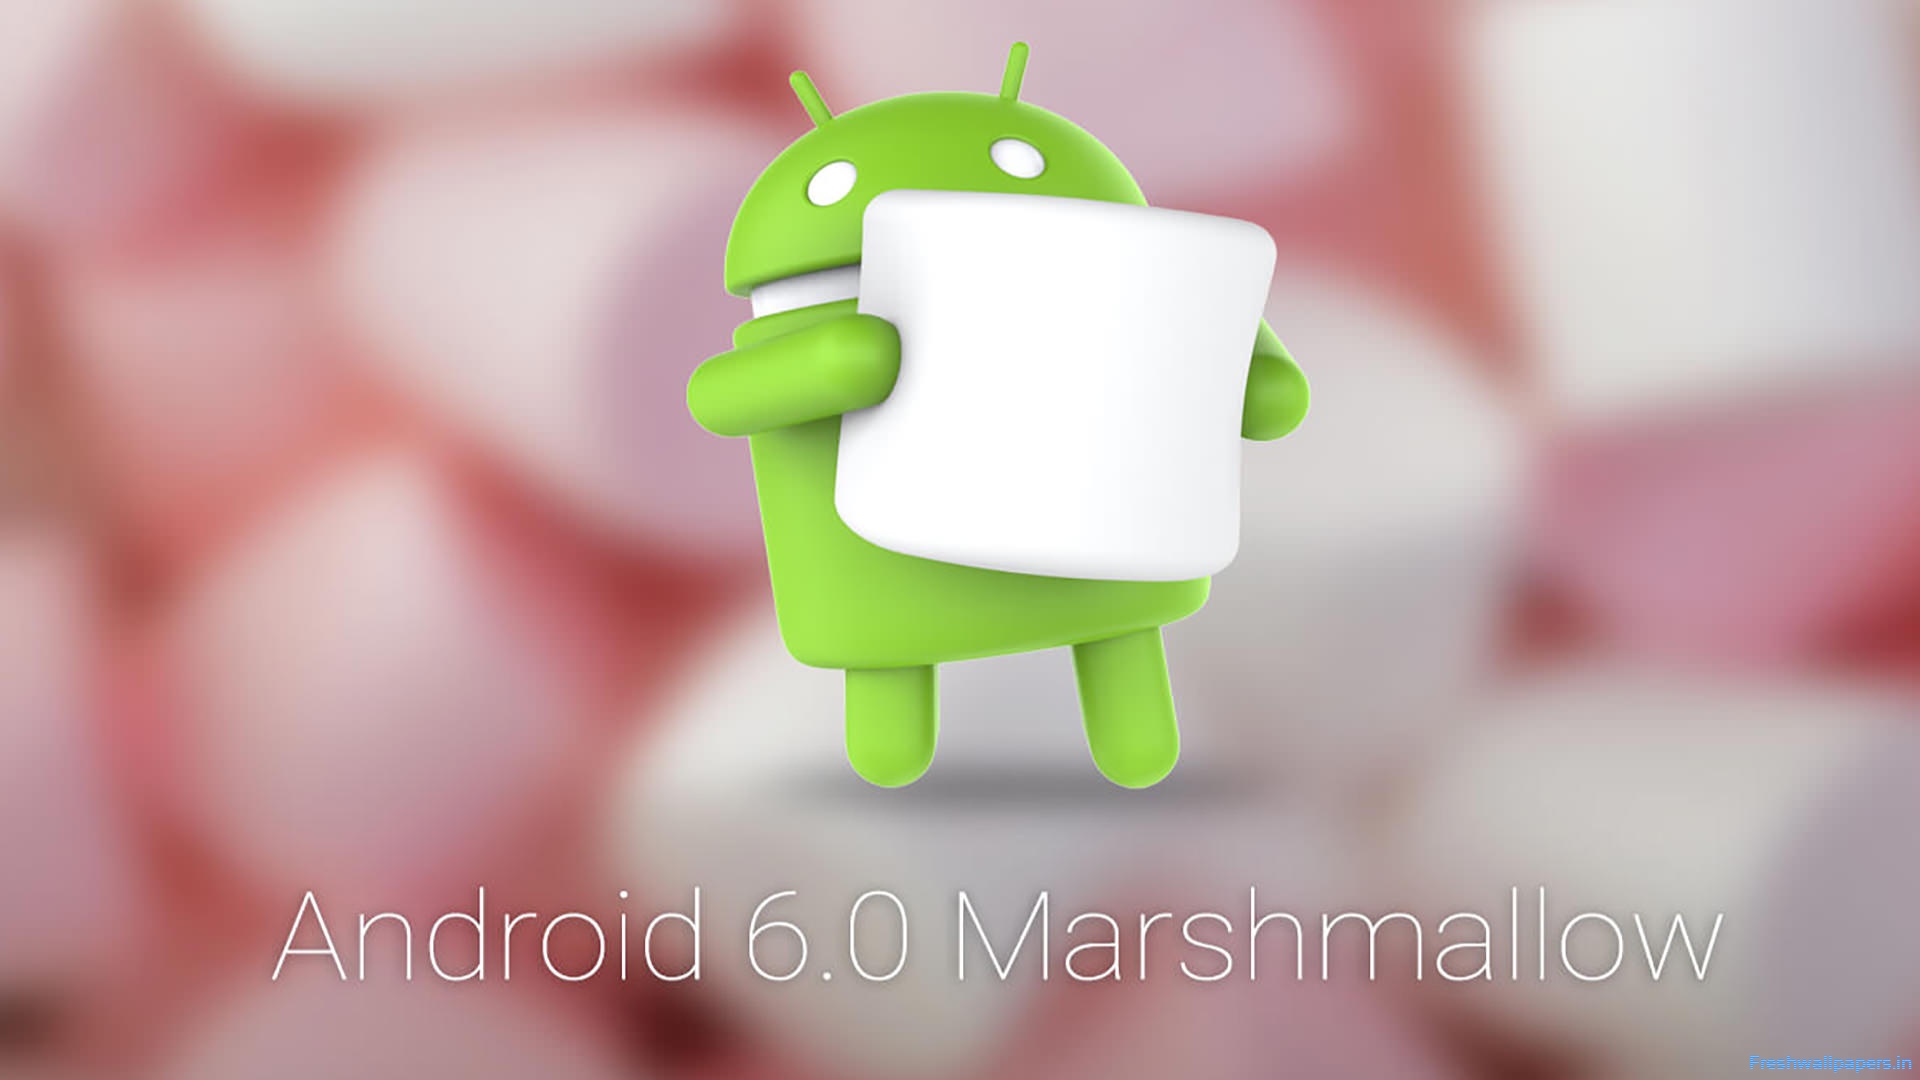 hd wallpapers for android marshmallow,green,technology,logo,finger,animation